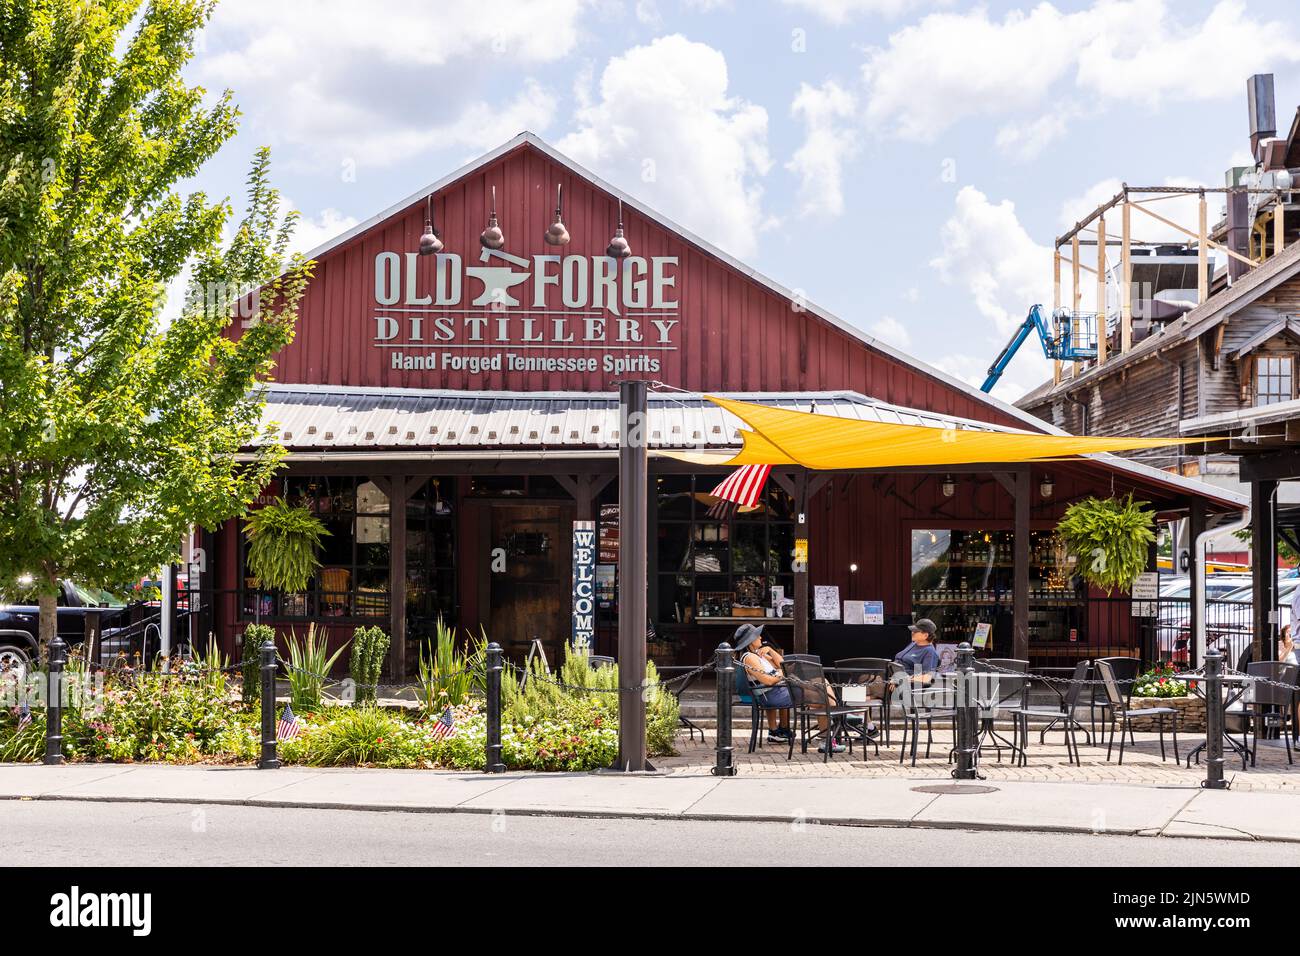 Old Forge Distillery is located in the Old Mill portion of Pigeon Forge, in the Smoky Mountains, and offer various types of craft spirits. Stock Photo